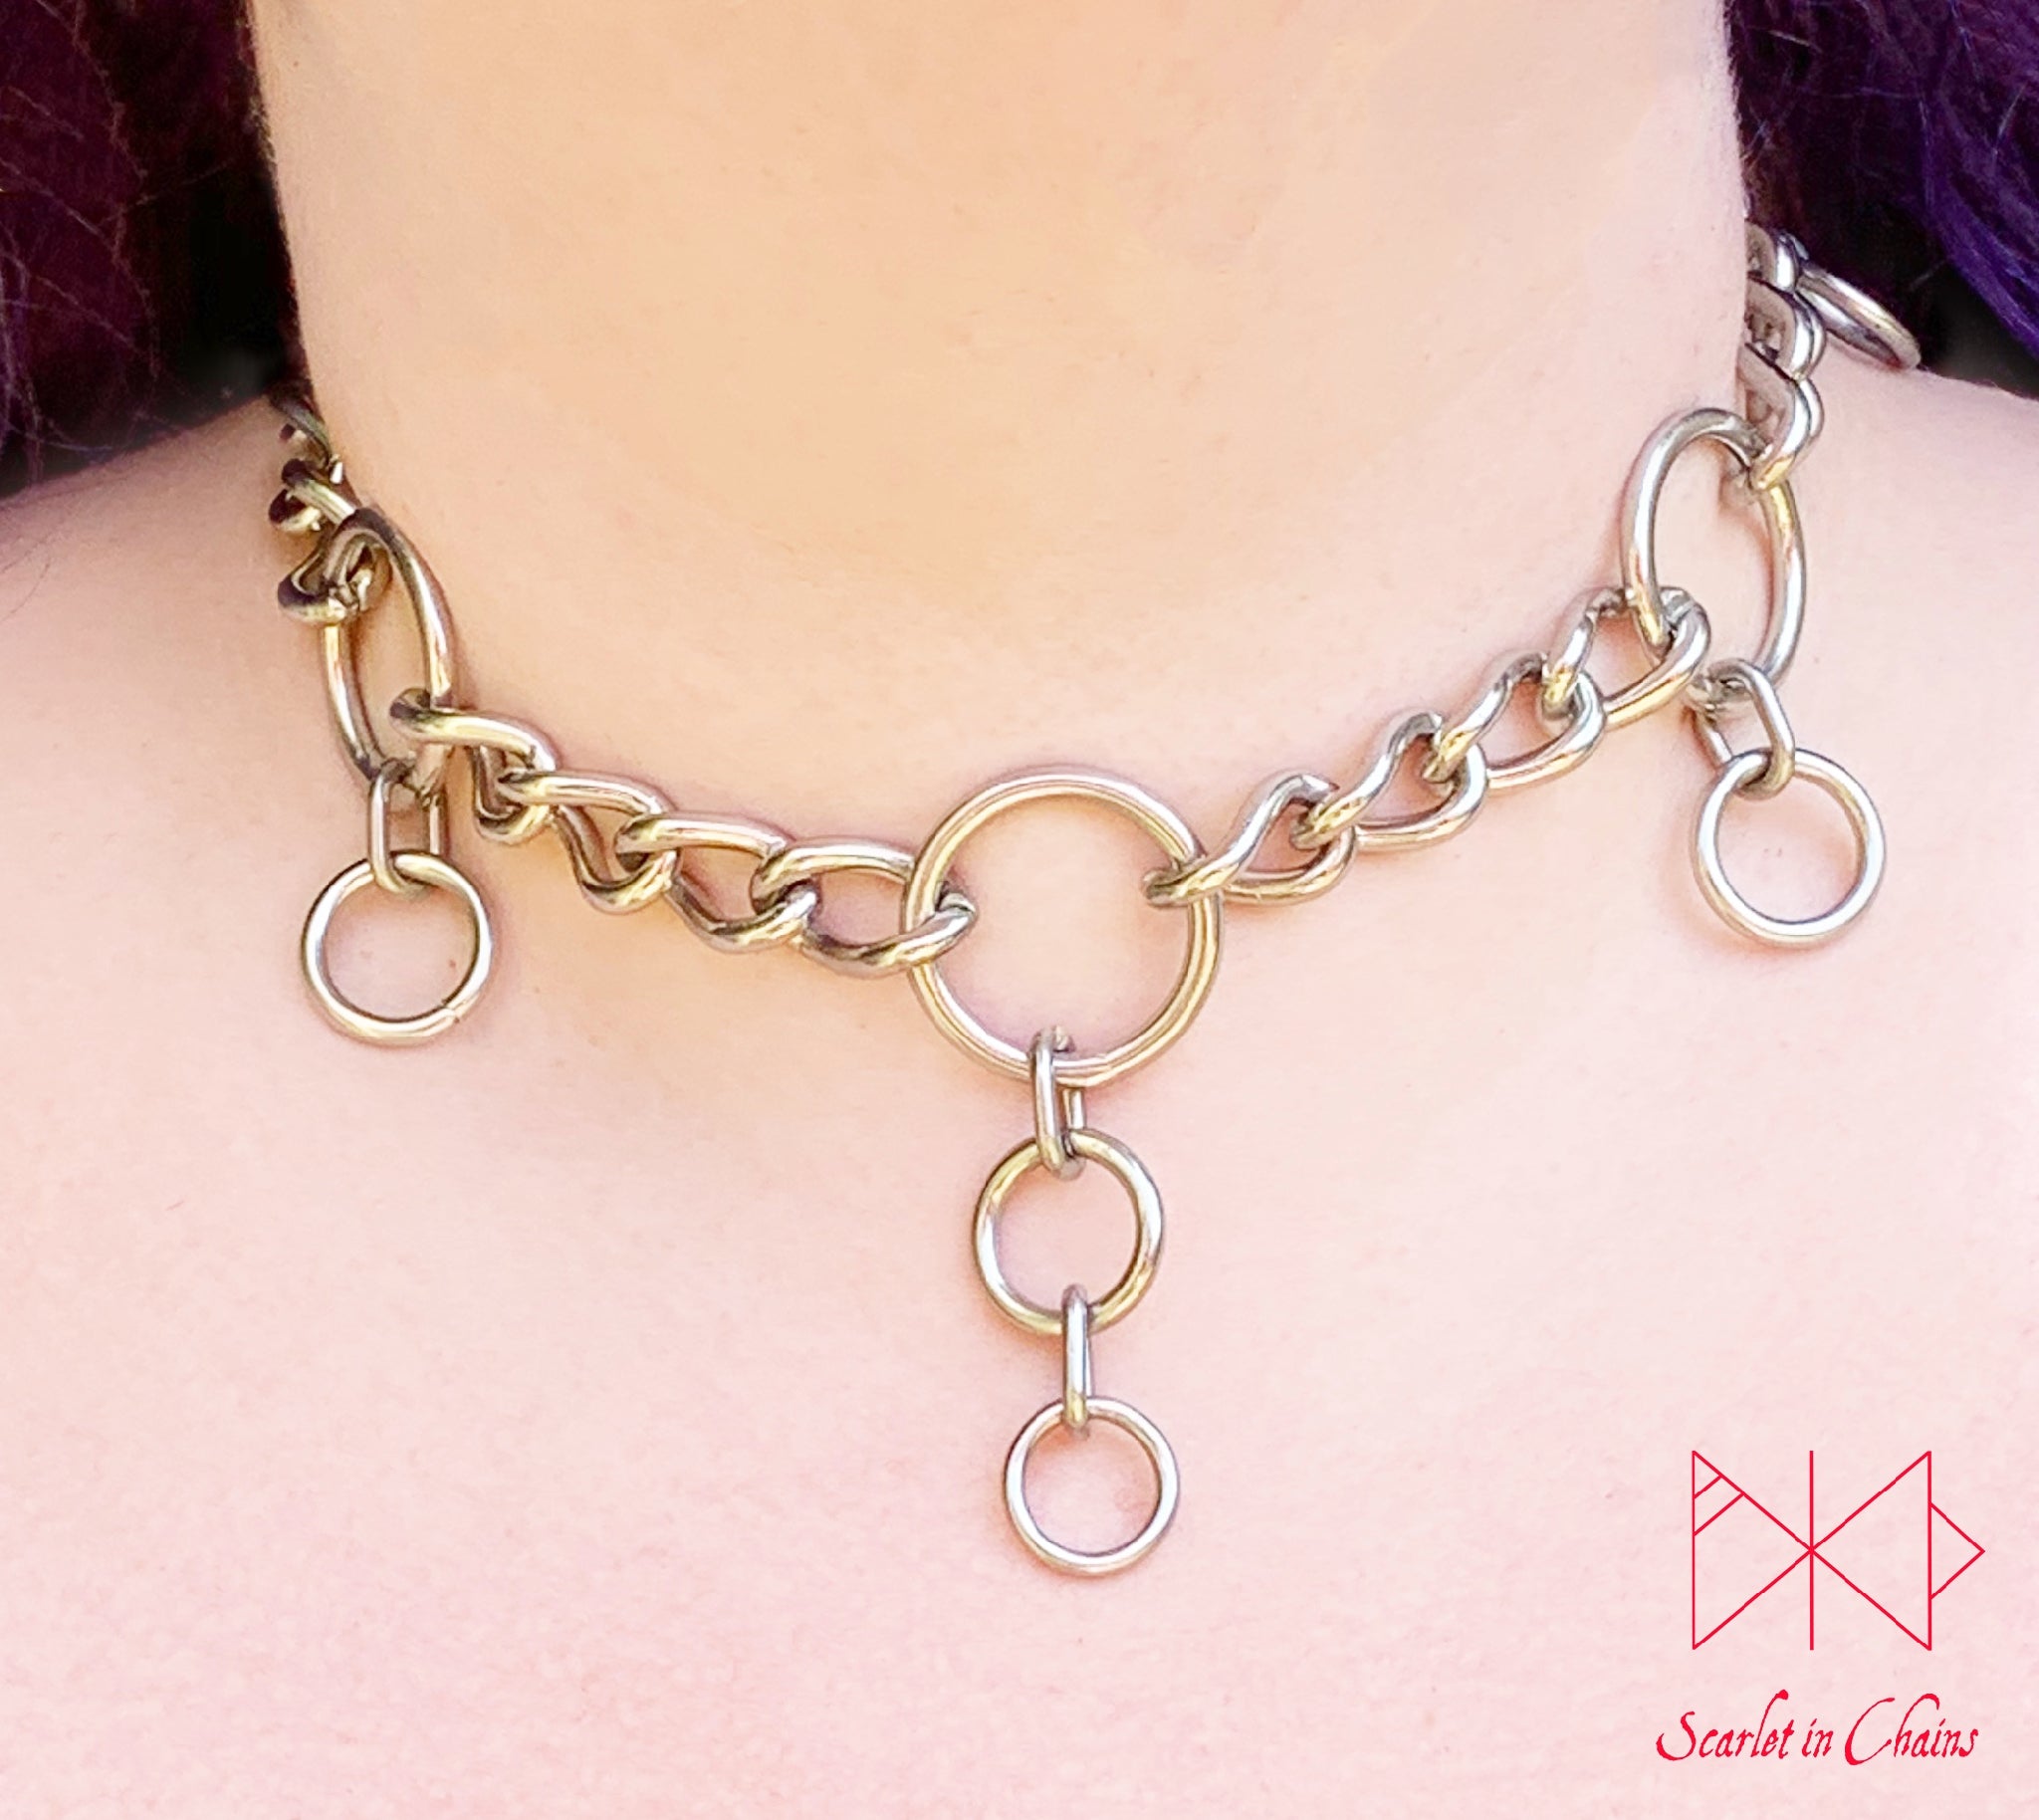 Worn image of Coven collar, 3mm stainless steel chain collar with 5 O rings set within the chain to represent the 5 points of the pentagram. hanging from the 4 side rings is 1 smaller O ring hanging off the central O ring is 2 smaller rings with new links